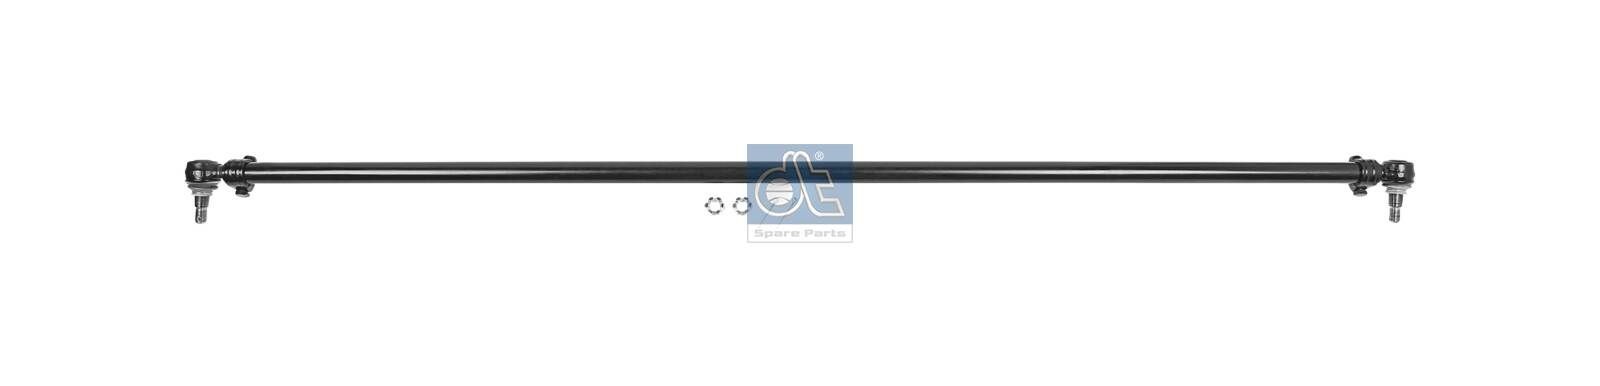 DT Spare Parts 3.63022 Rod Assembly 81467106866